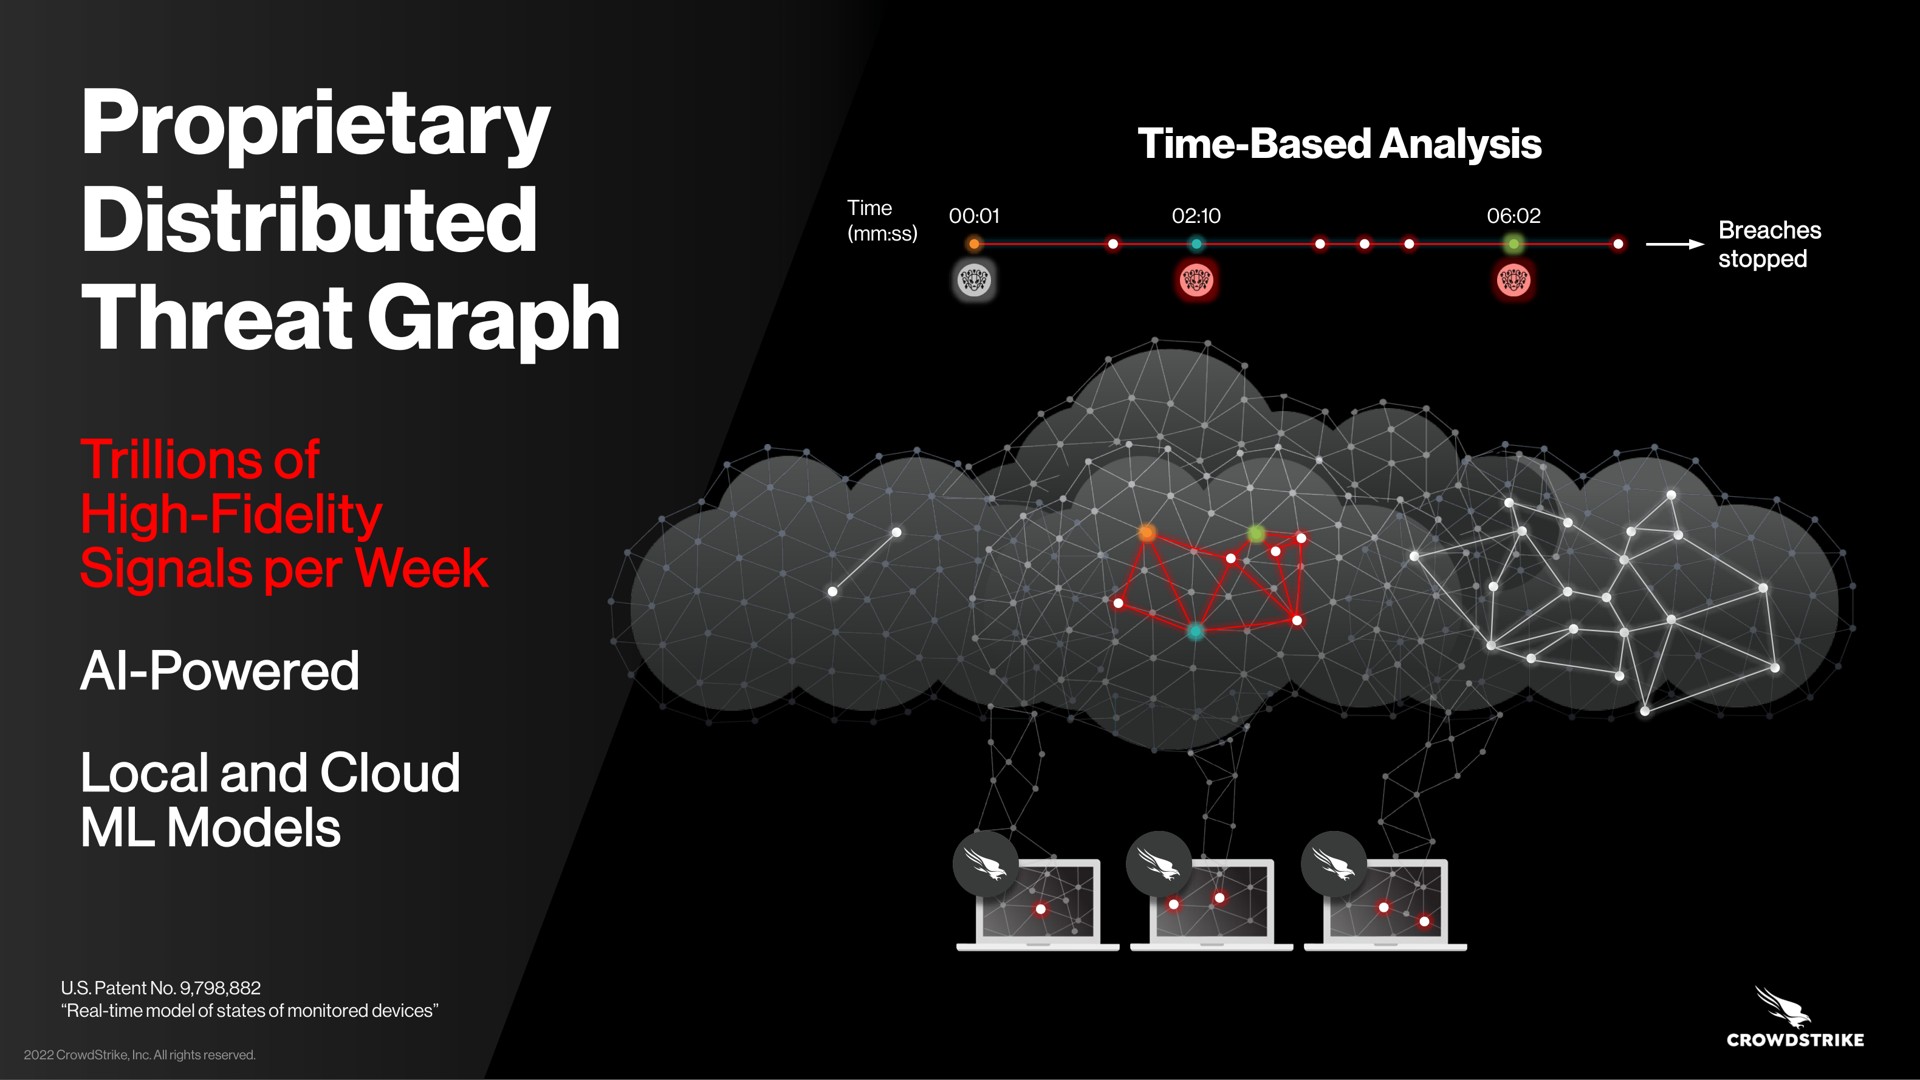 proprietary distributed threat graph trillions of high fidelity signals per week powered local and cloud models time based analysis a go breaches powered | Crowdstrike